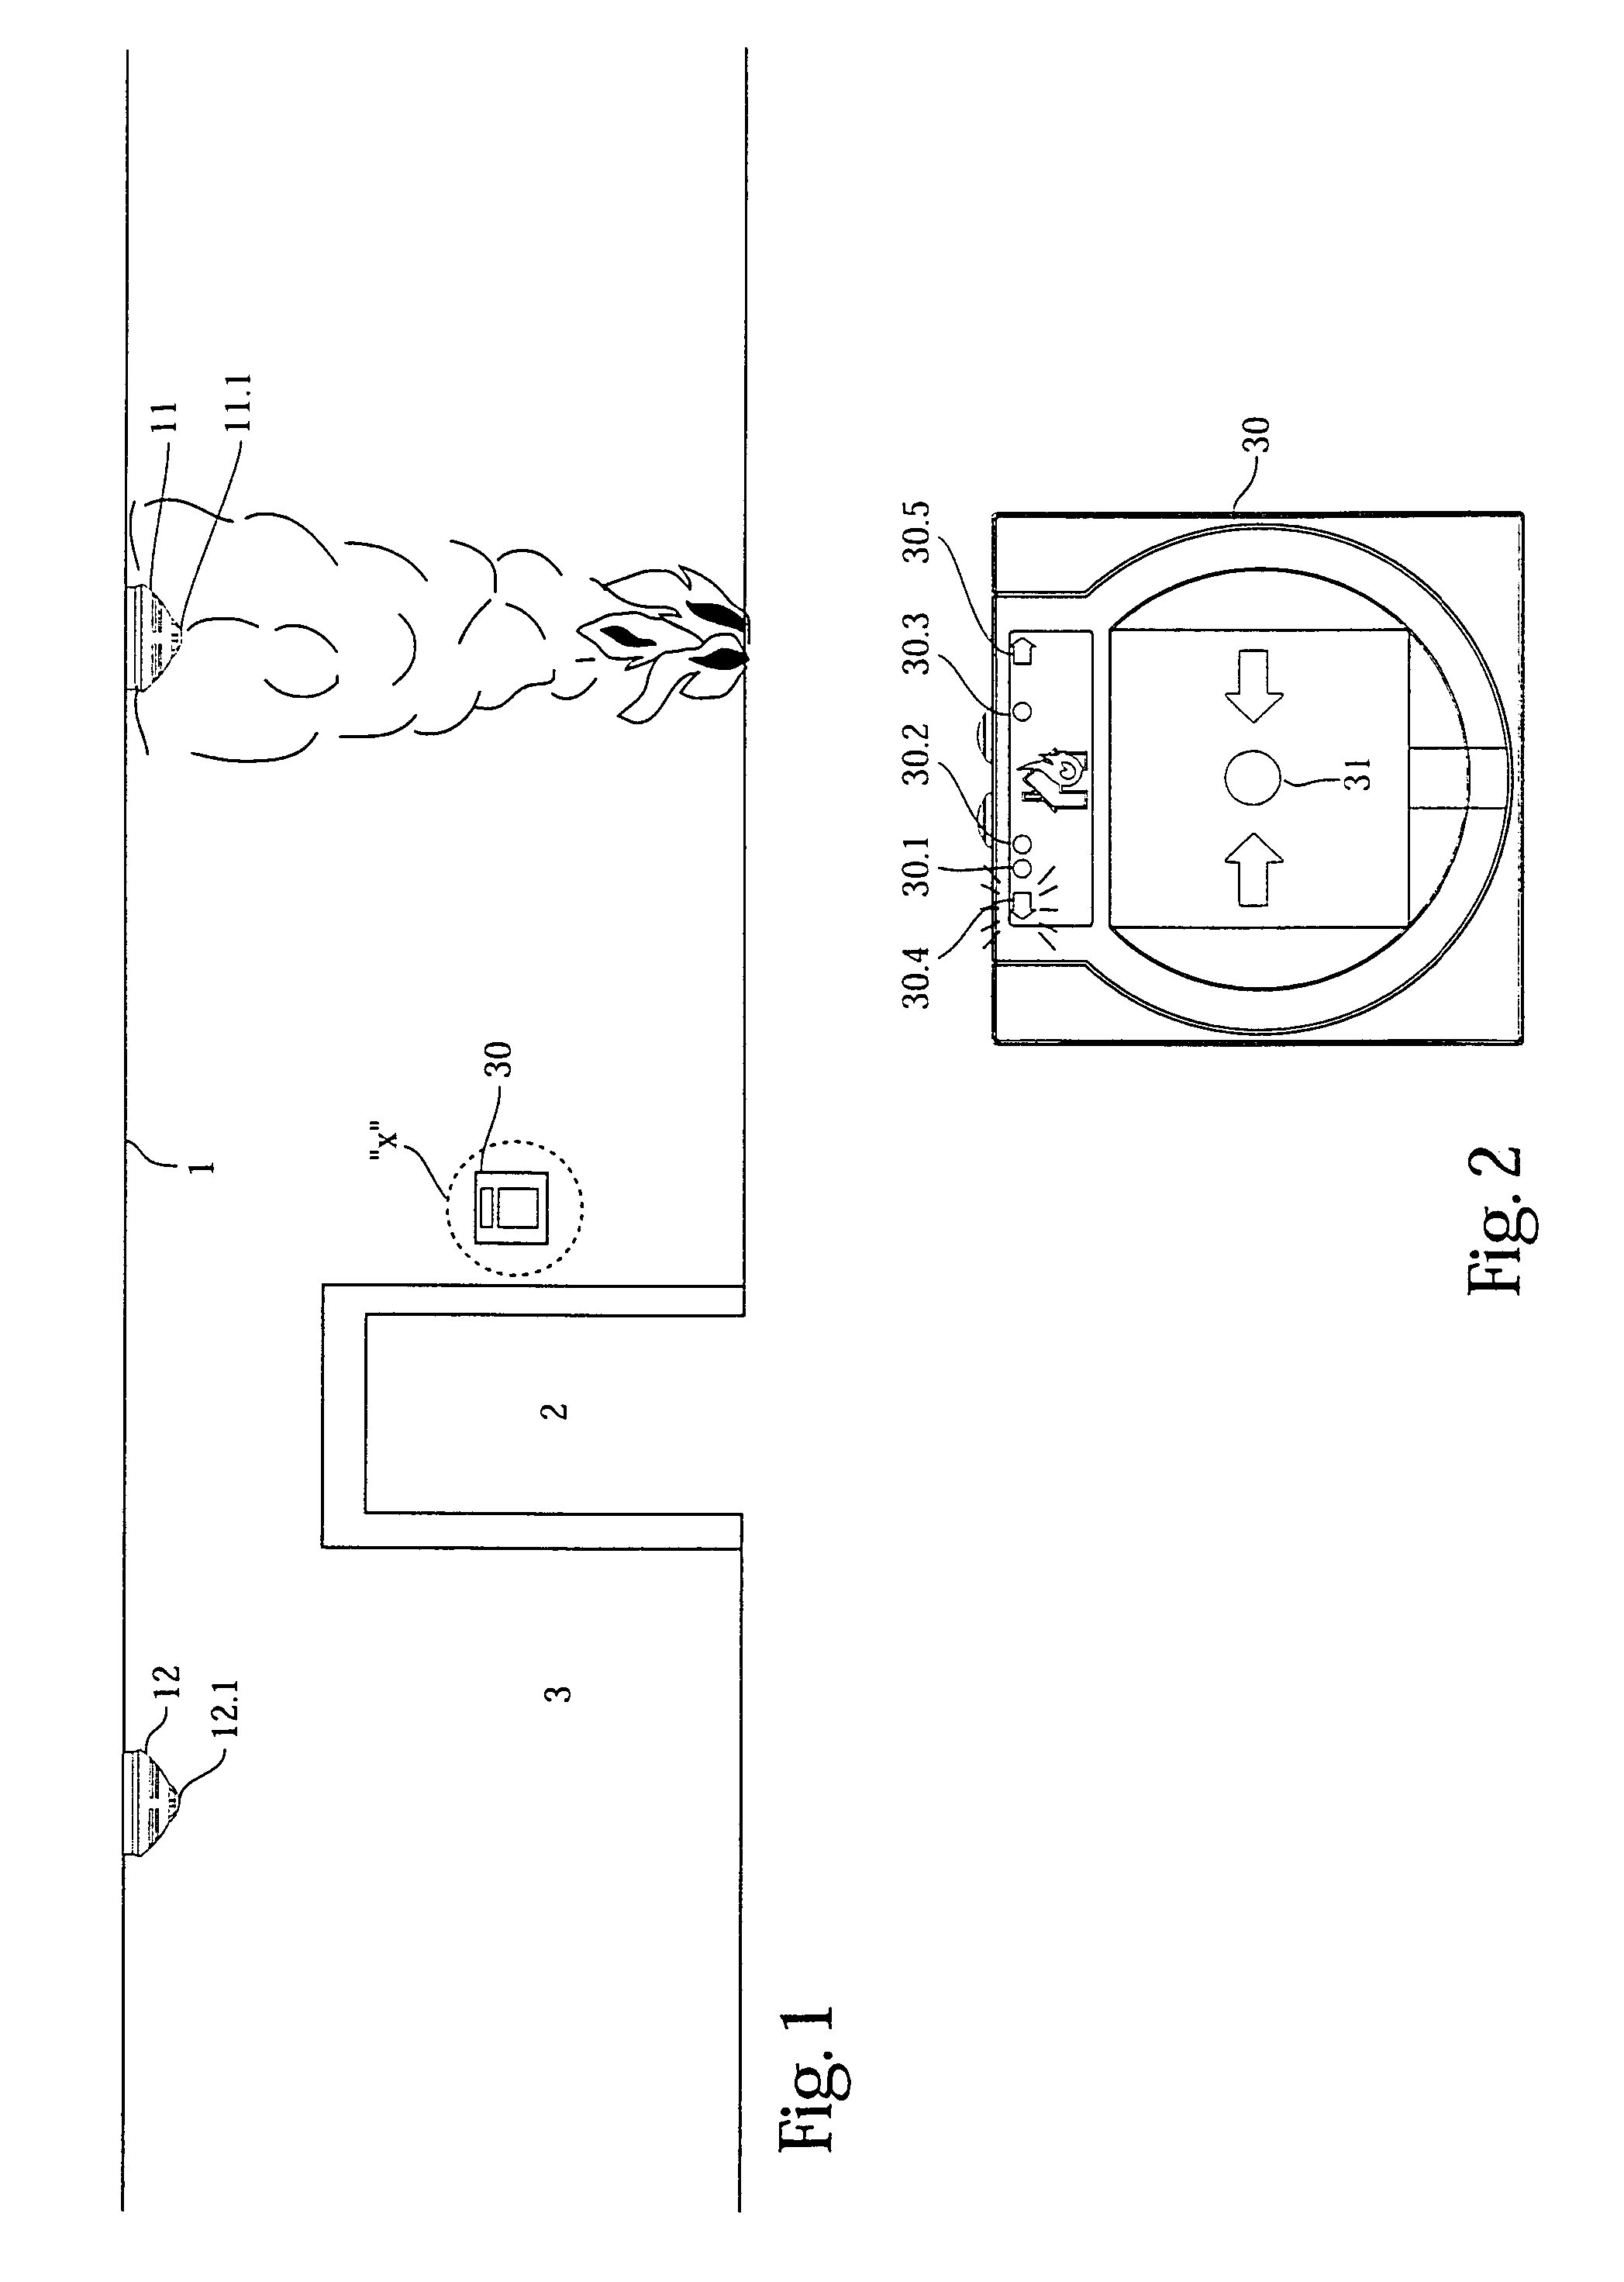 Method and apparatus for marking an escape route